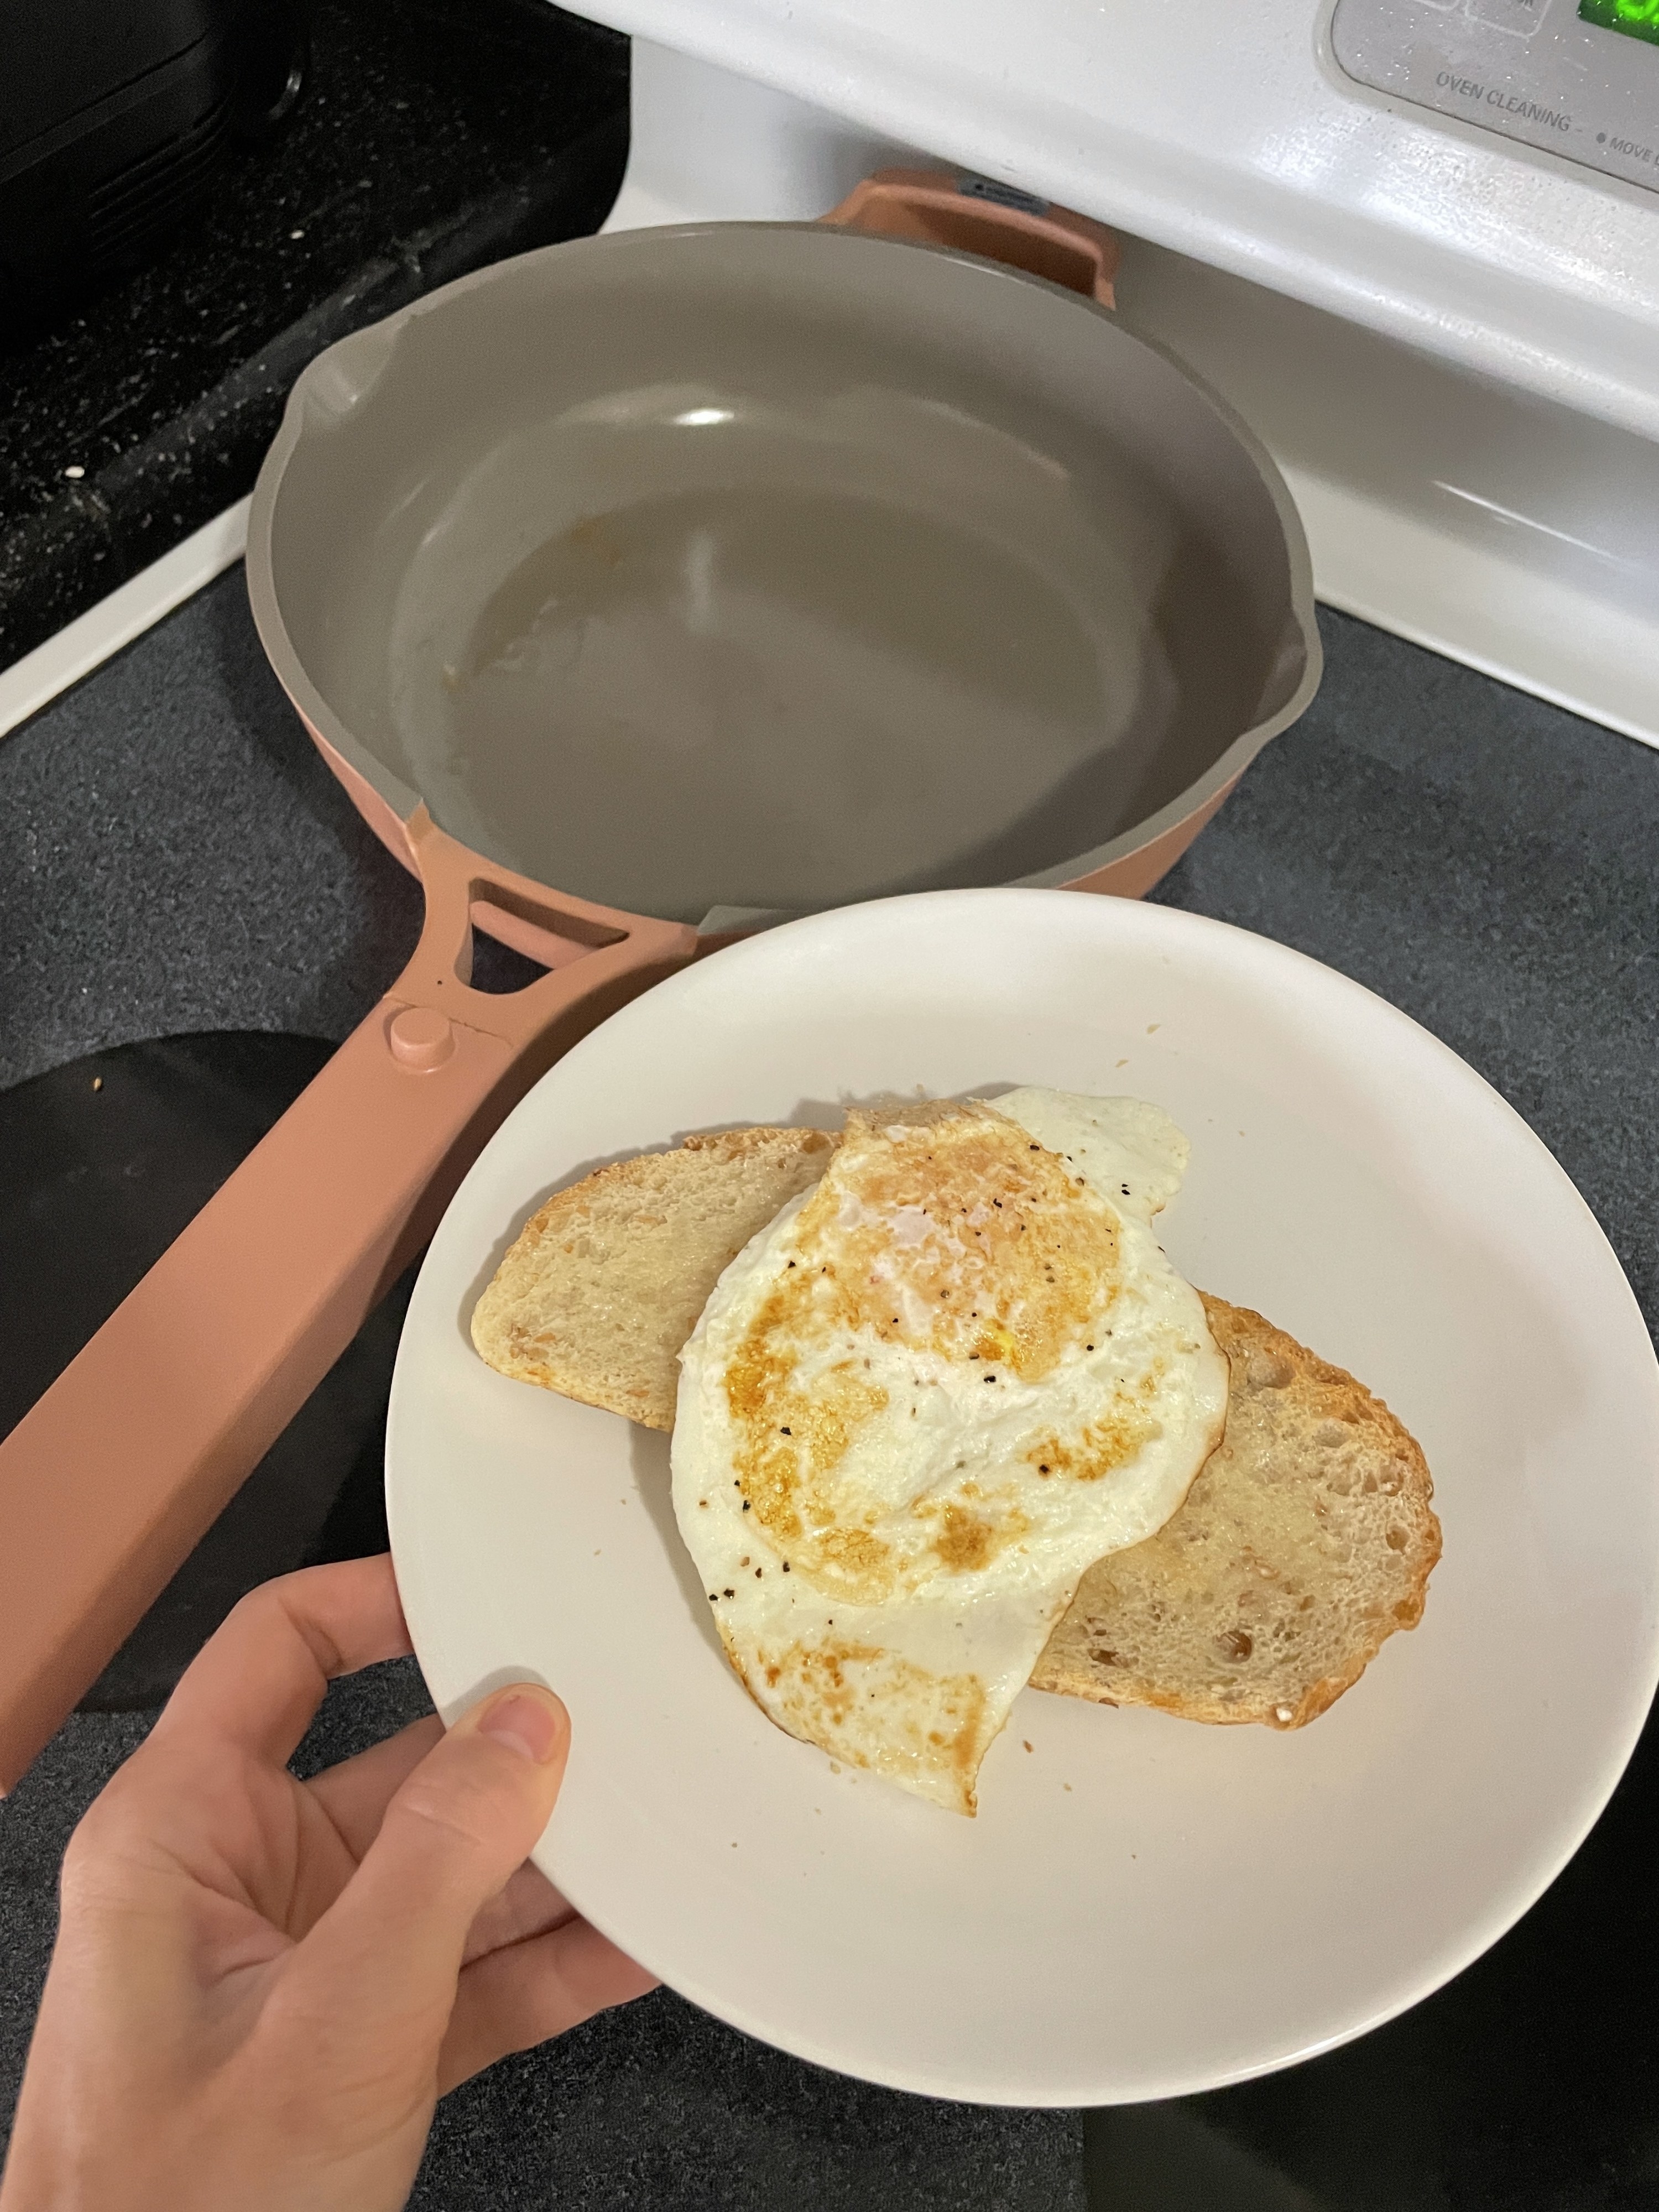 Perfect-looking over-easy egg on a plate with bread